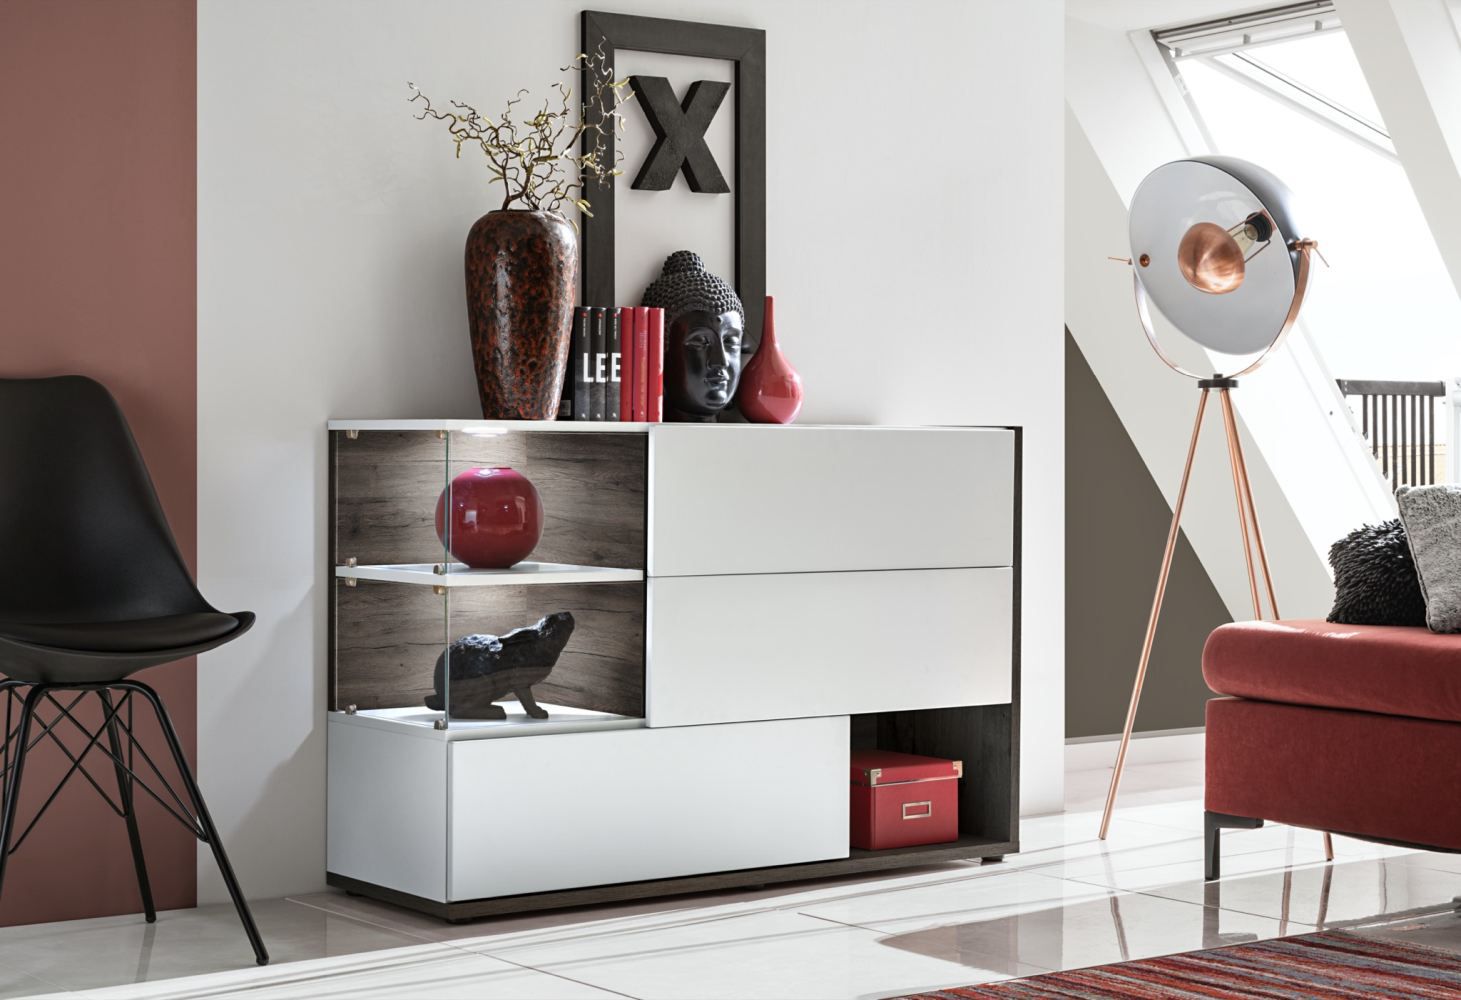 Sideboard / chest of drawers Bjordal 43, Colour: White high gloss / Brown - Measurements: 77 x 120 x 40 cm (H x W x D), with push-to-open function.